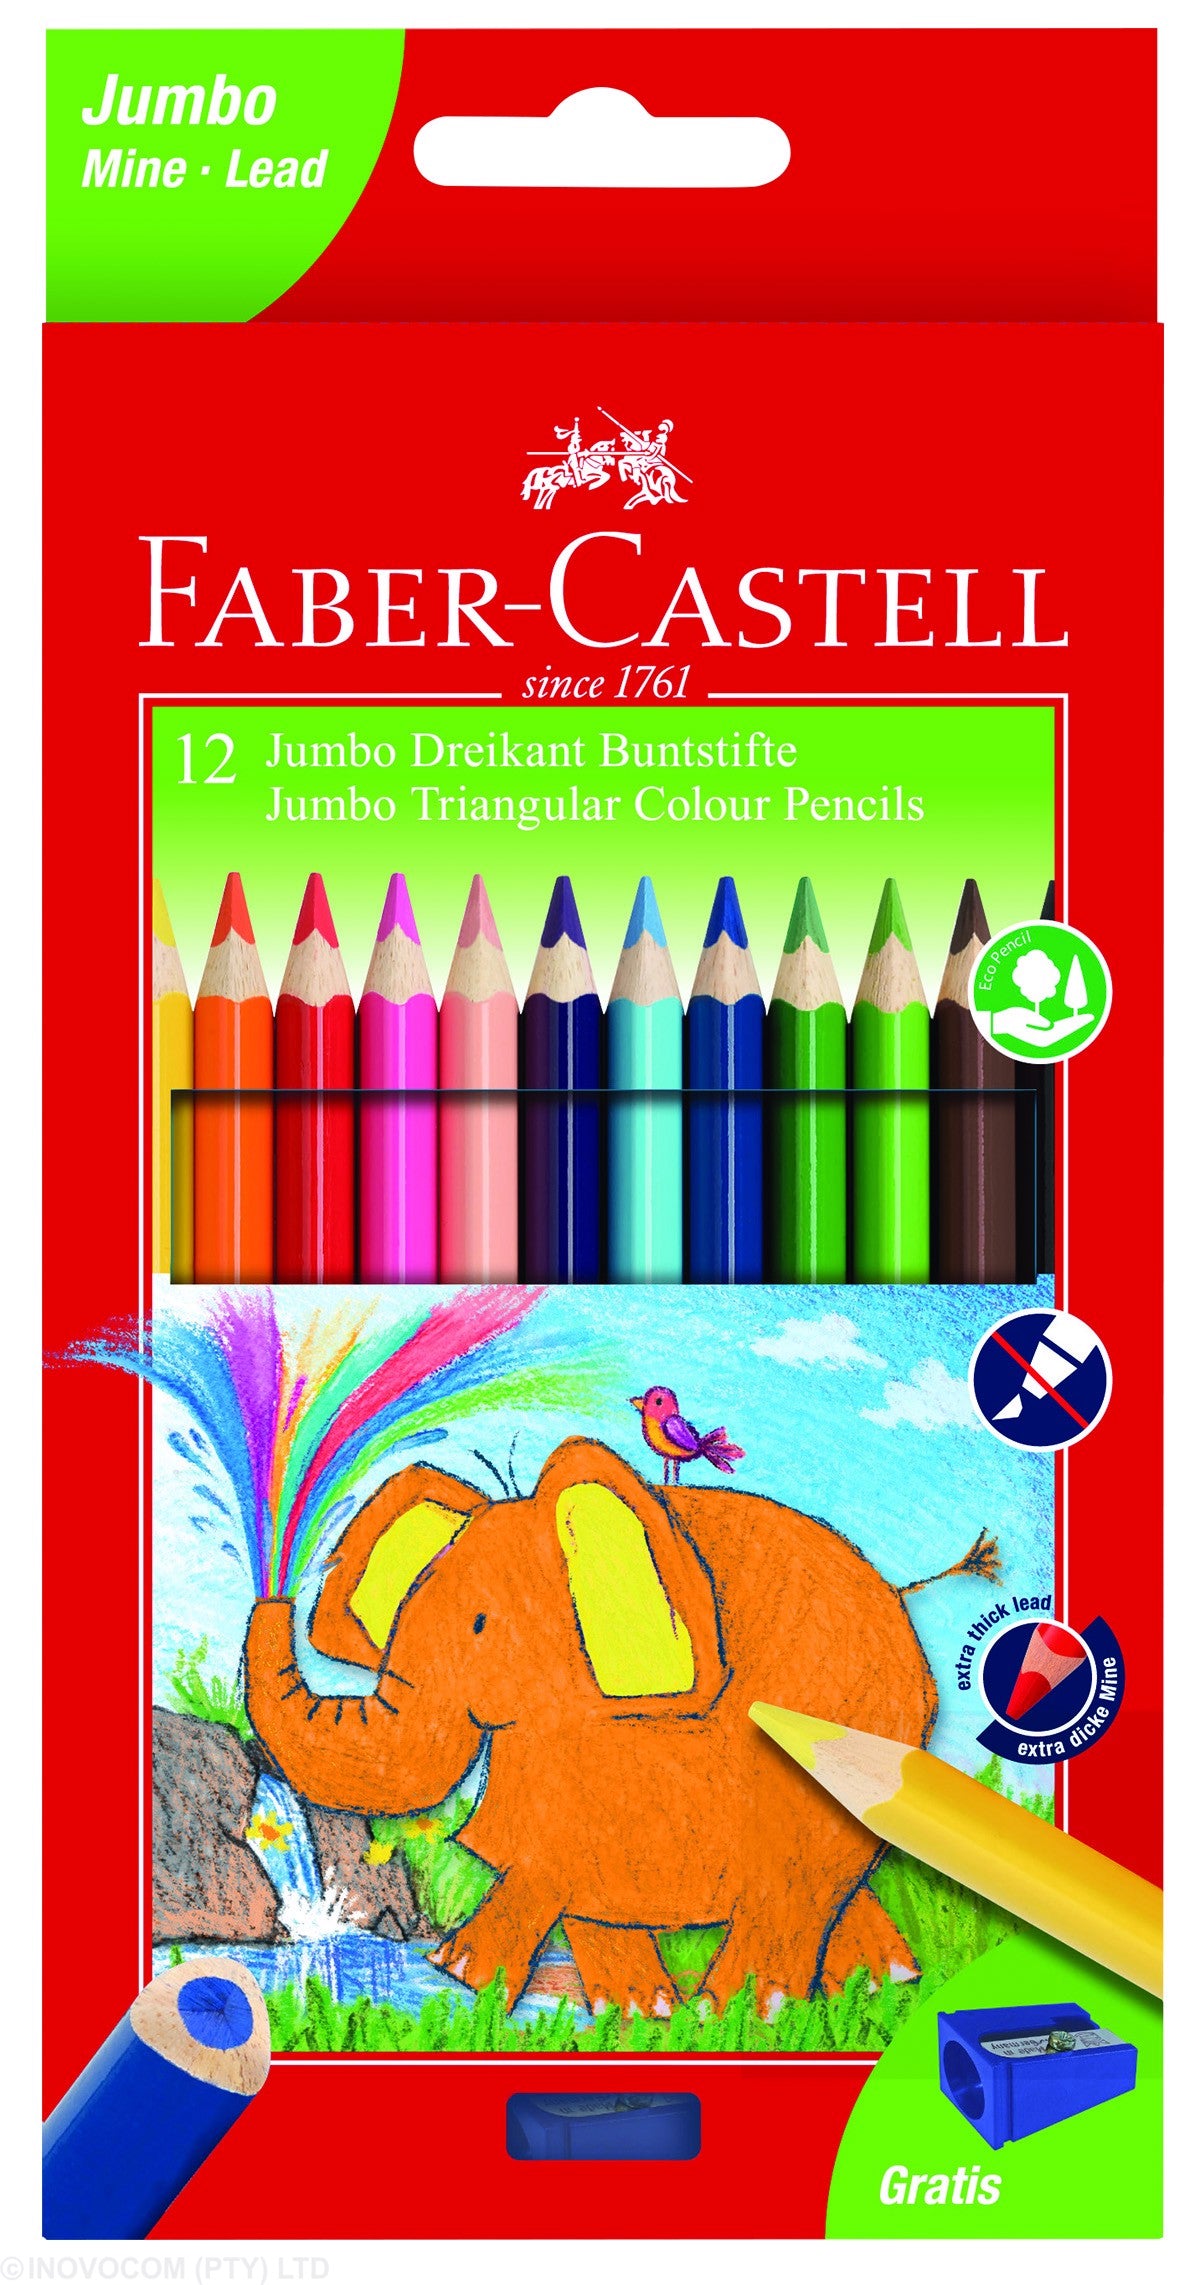 Faber Castell 12 Jumbo Triangular Colour Pencils with Free Sharpeners